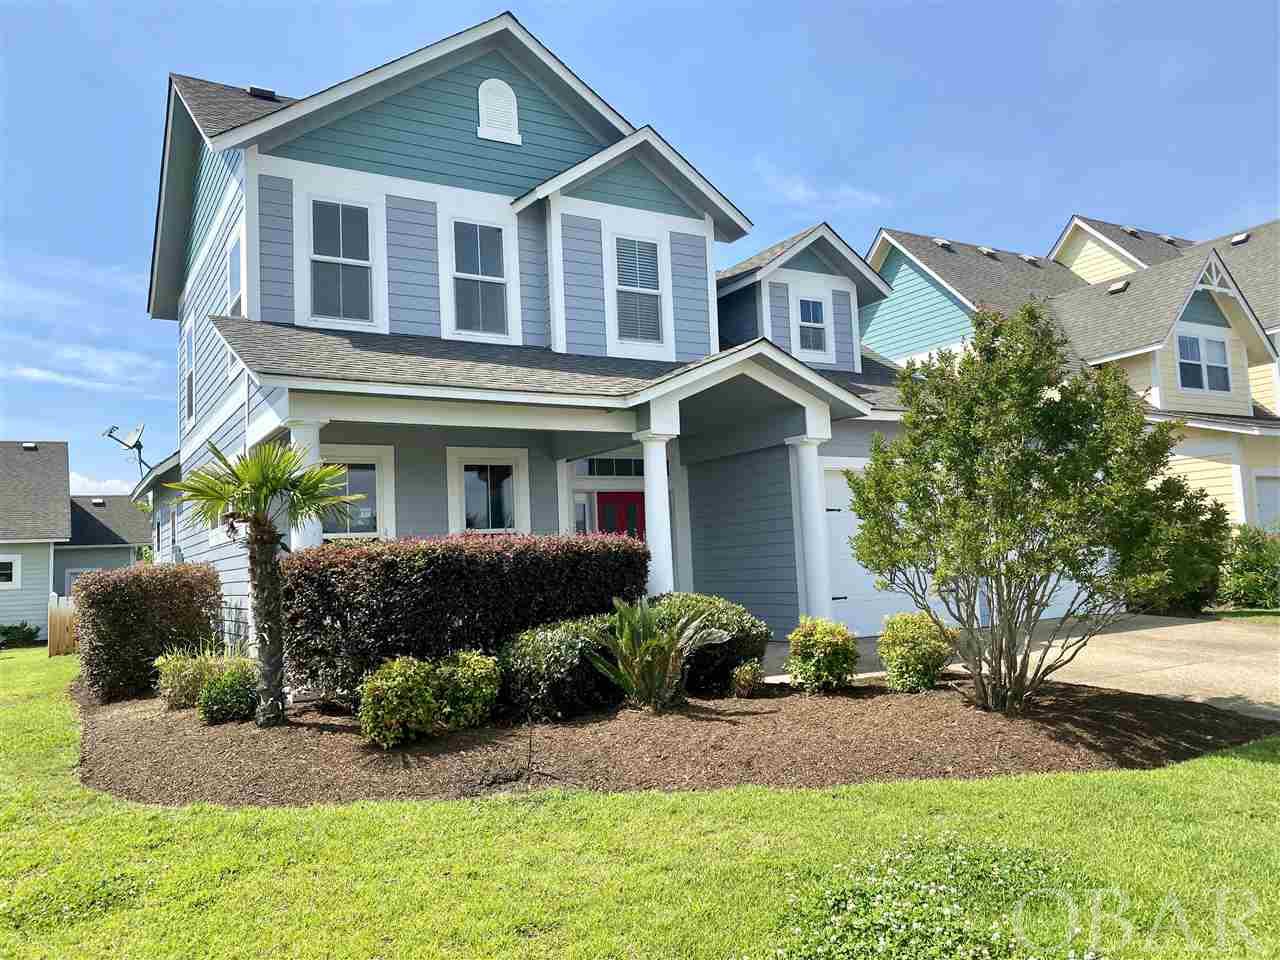 201 Waterfront Drive, Grandy, NC 27939, 4 Bedrooms Bedrooms, ,3 BathroomsBathrooms,Residential,For sale,Waterfront Drive,109657